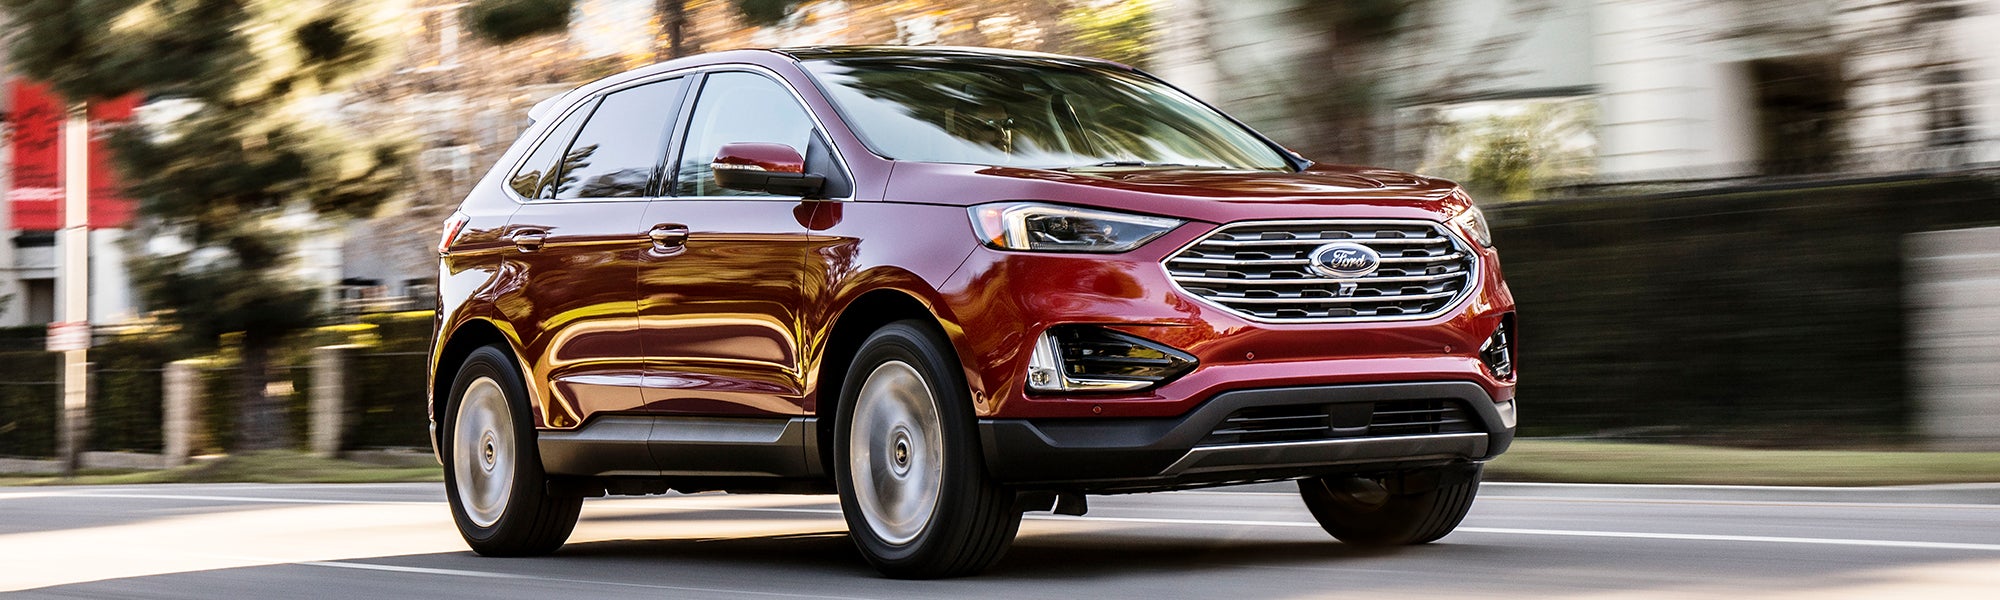 2020 Ford Edge For Sale